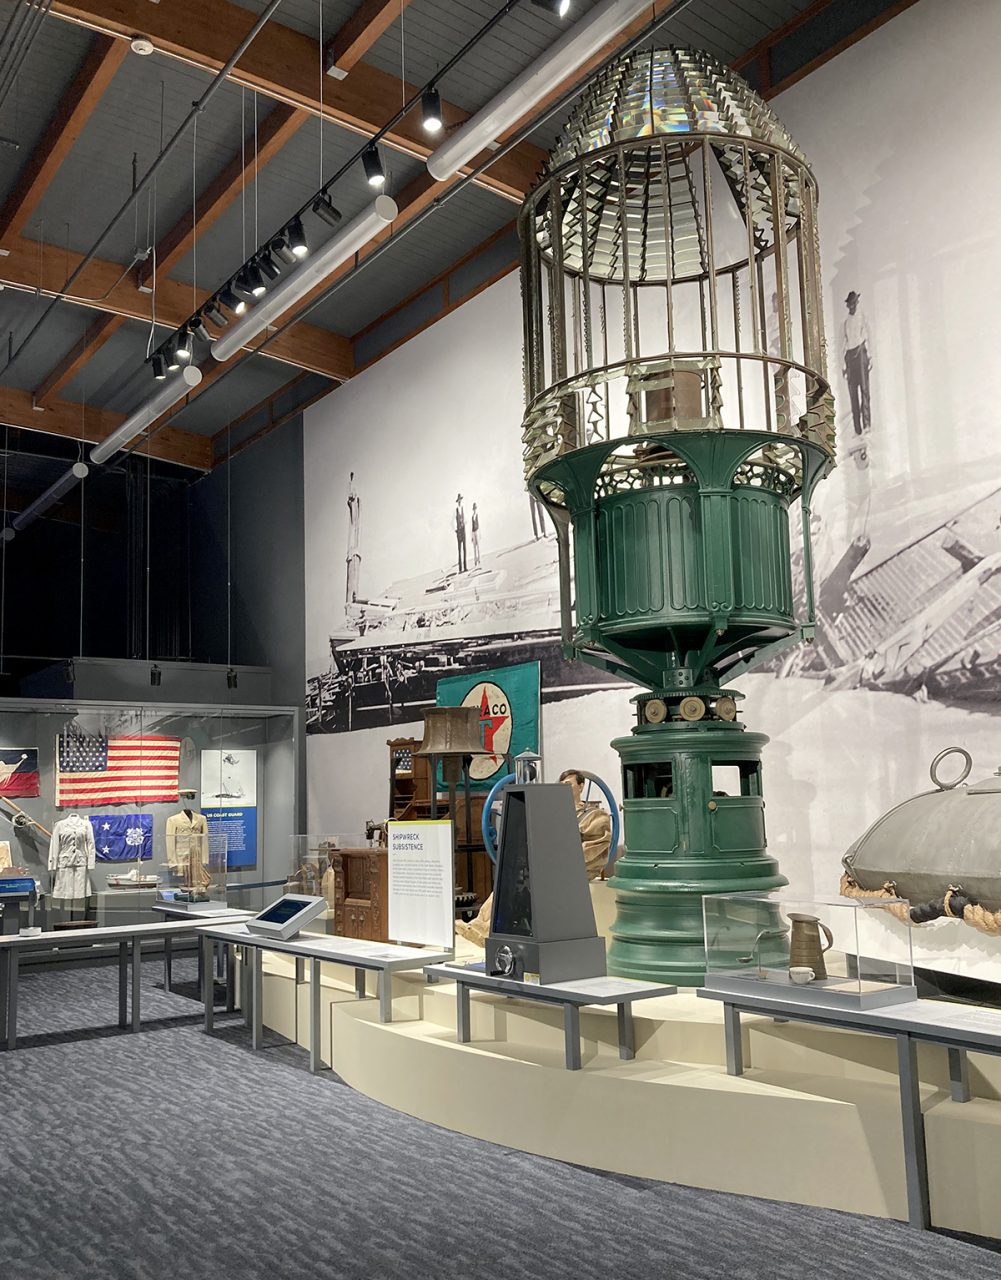 A Fresnel lens looms large over this exhibit space at the Graveyard of the Atlantic Museum. Photo: Catherine Kozak